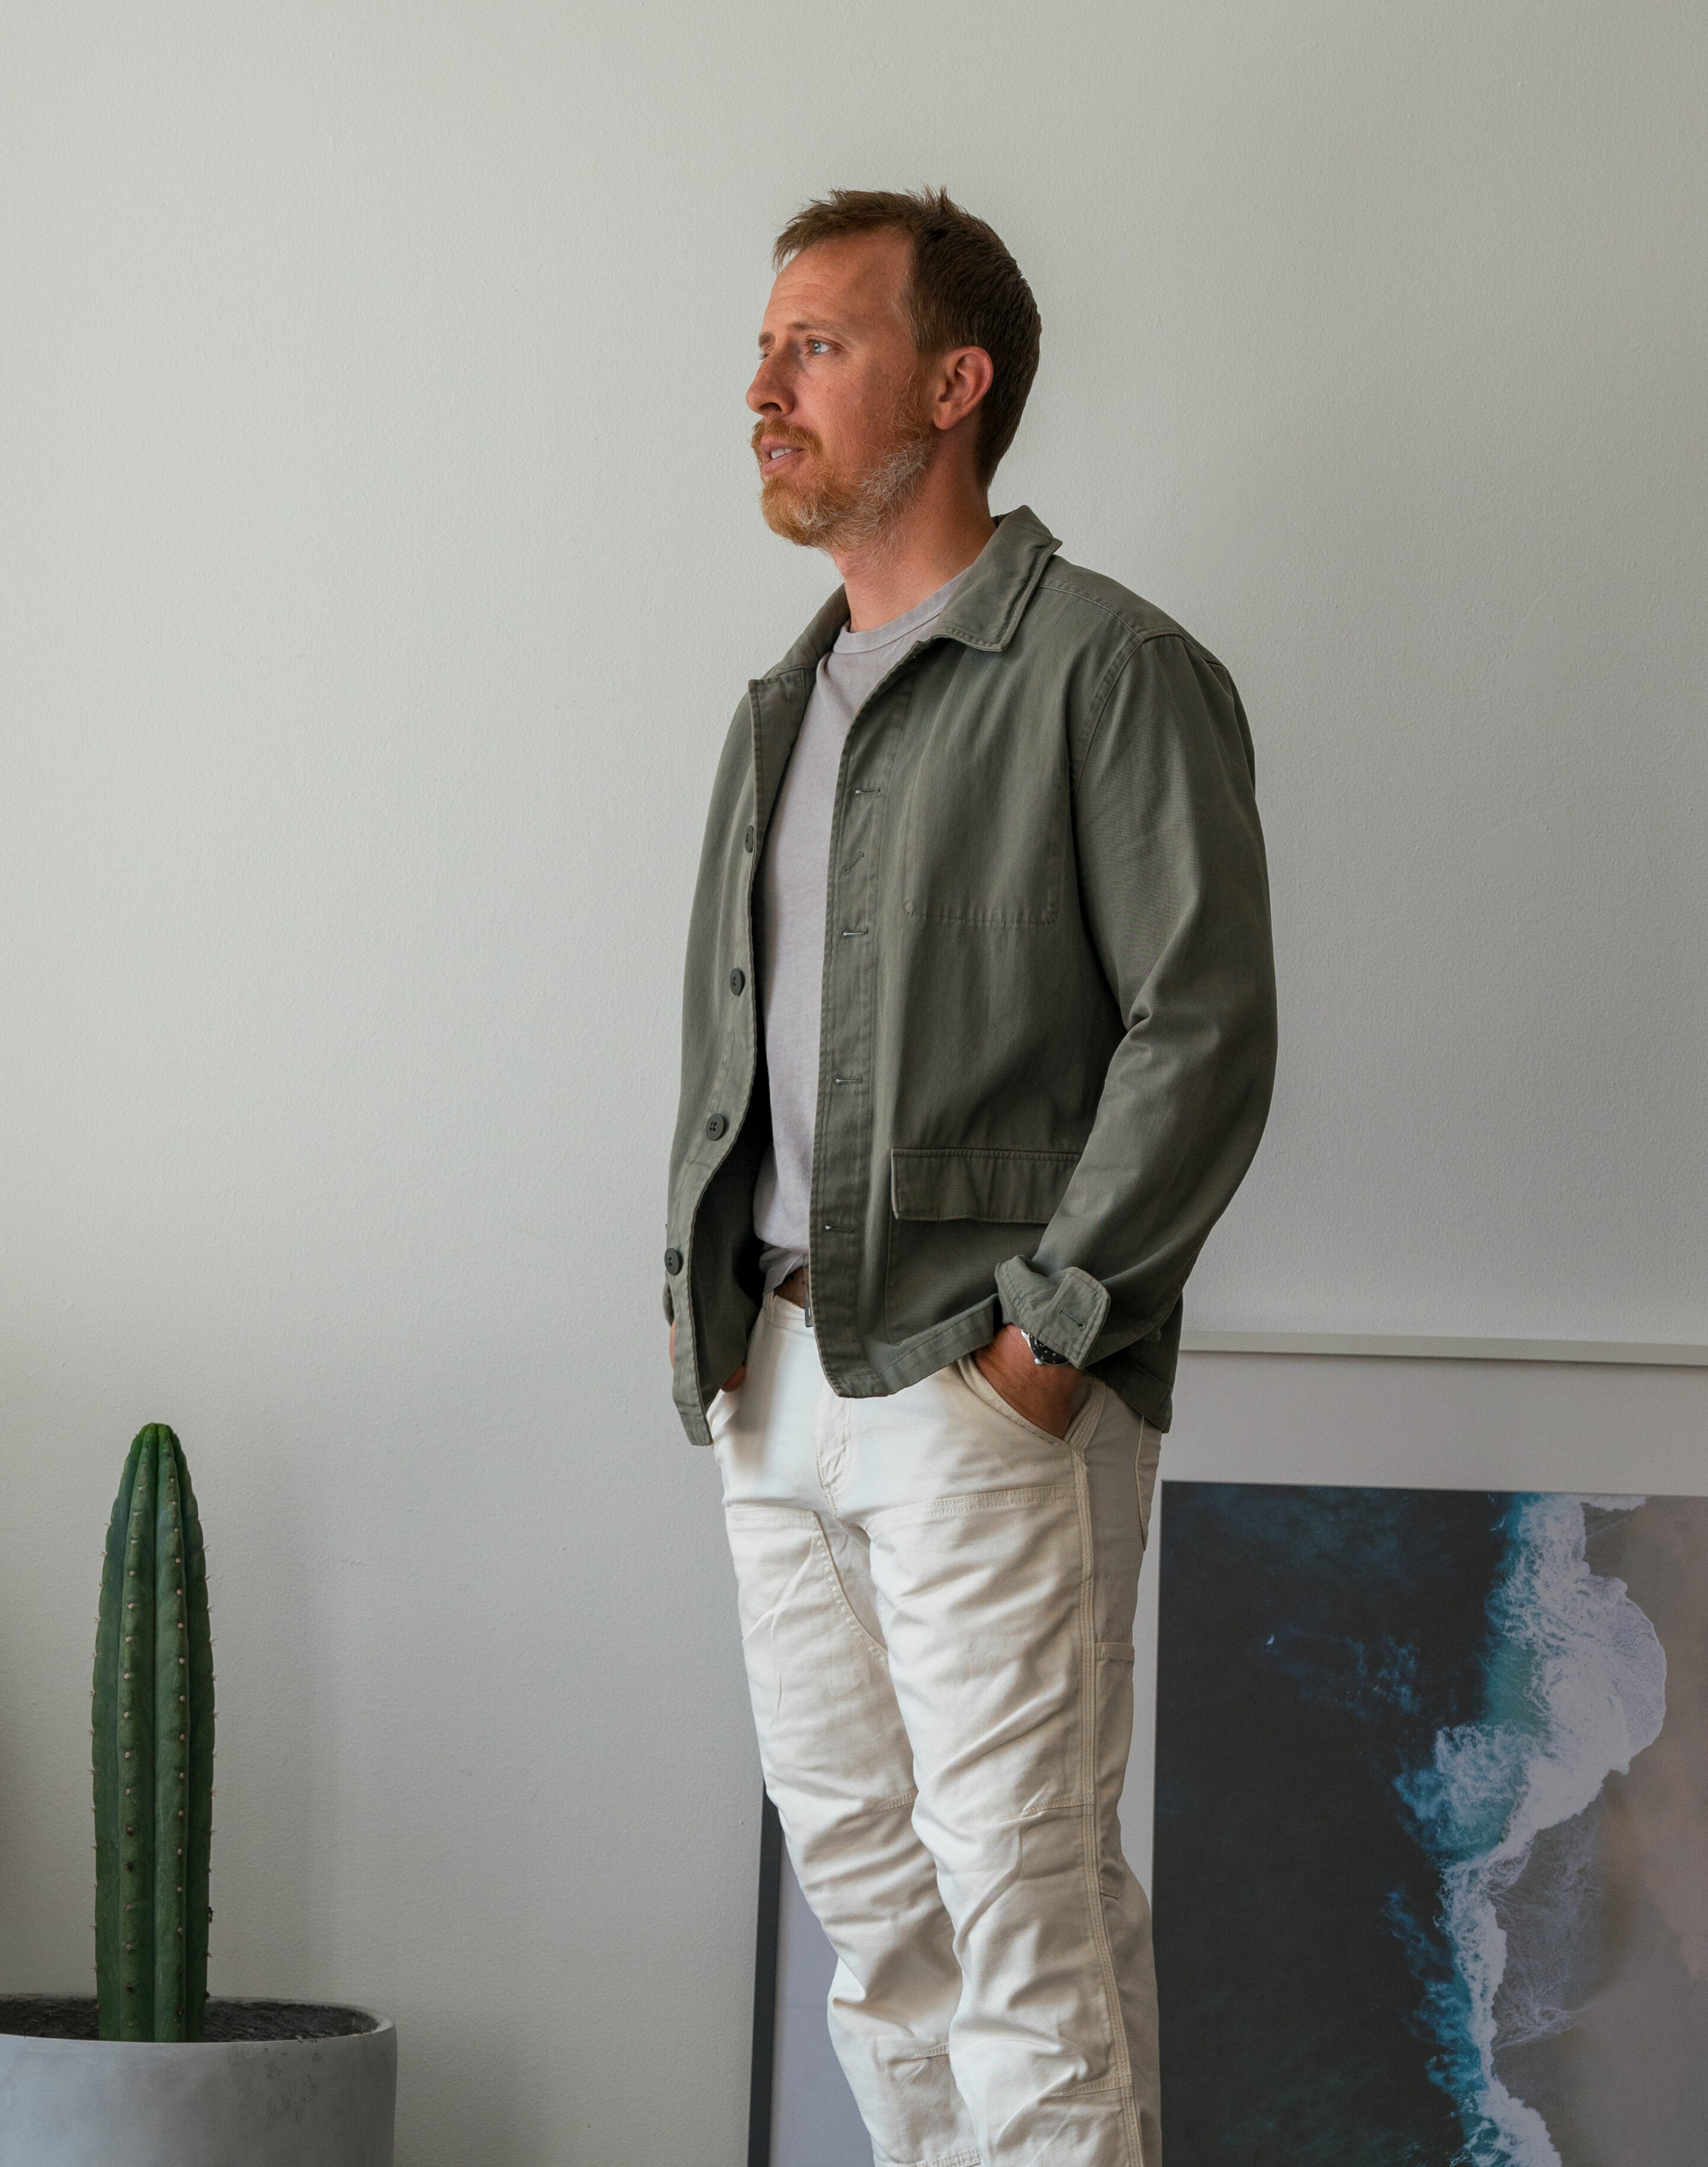 an olive chore coat worn with a gray t-shirt and white carhartt utility pants